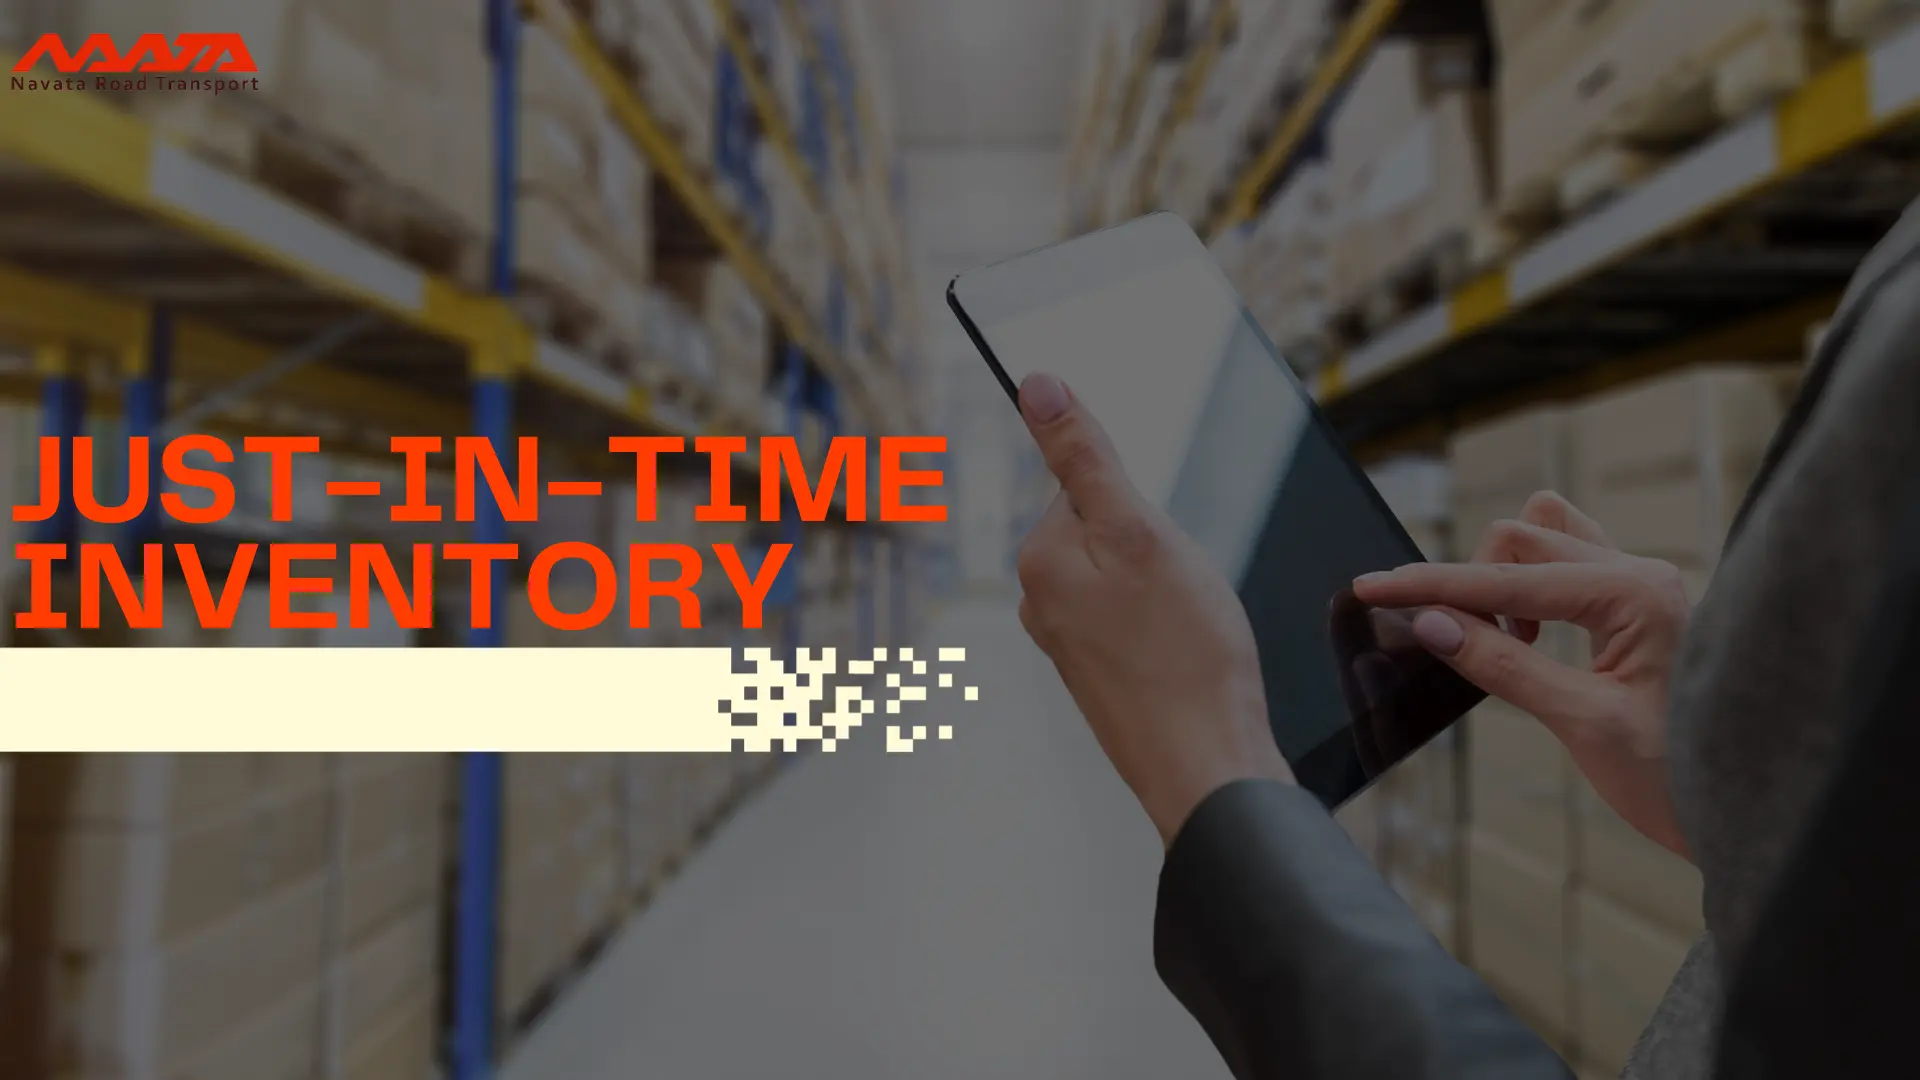 Just-In-Time Inventory (JIT)